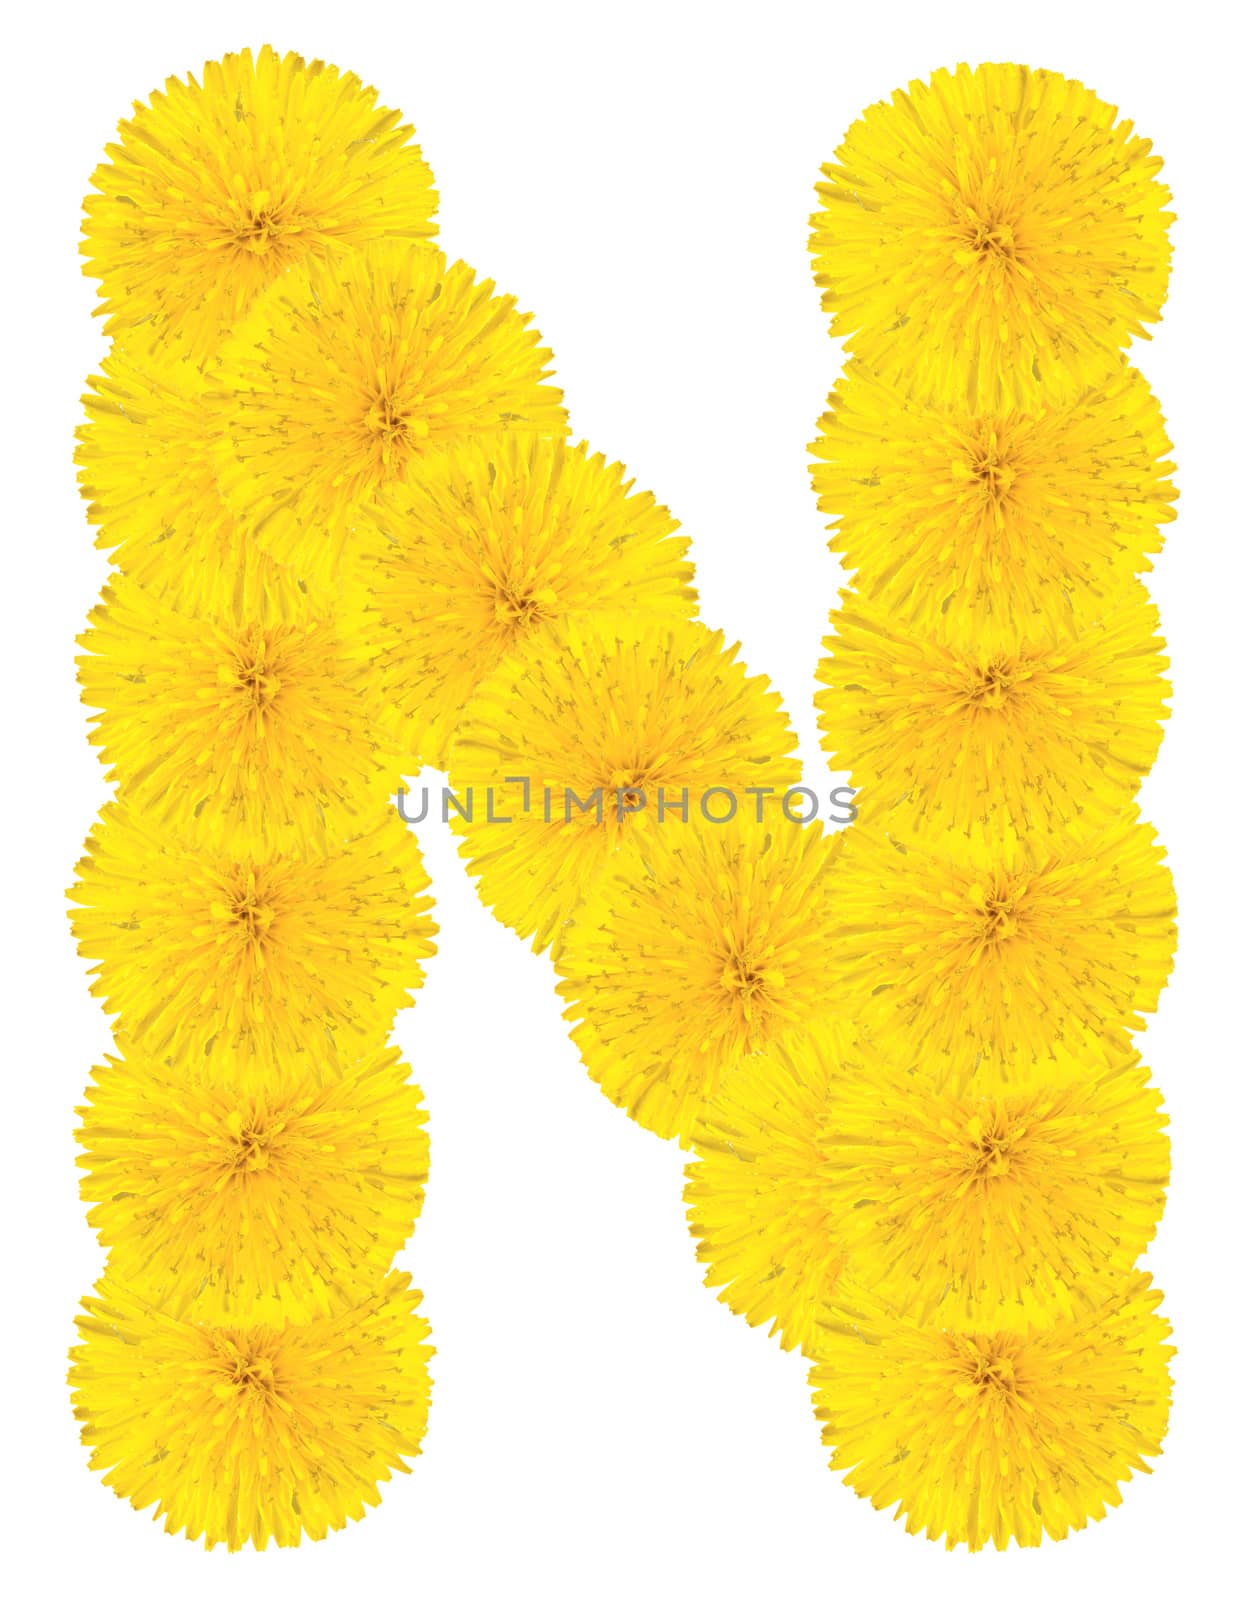 Letter N made from dandelion flowers isolated on white background